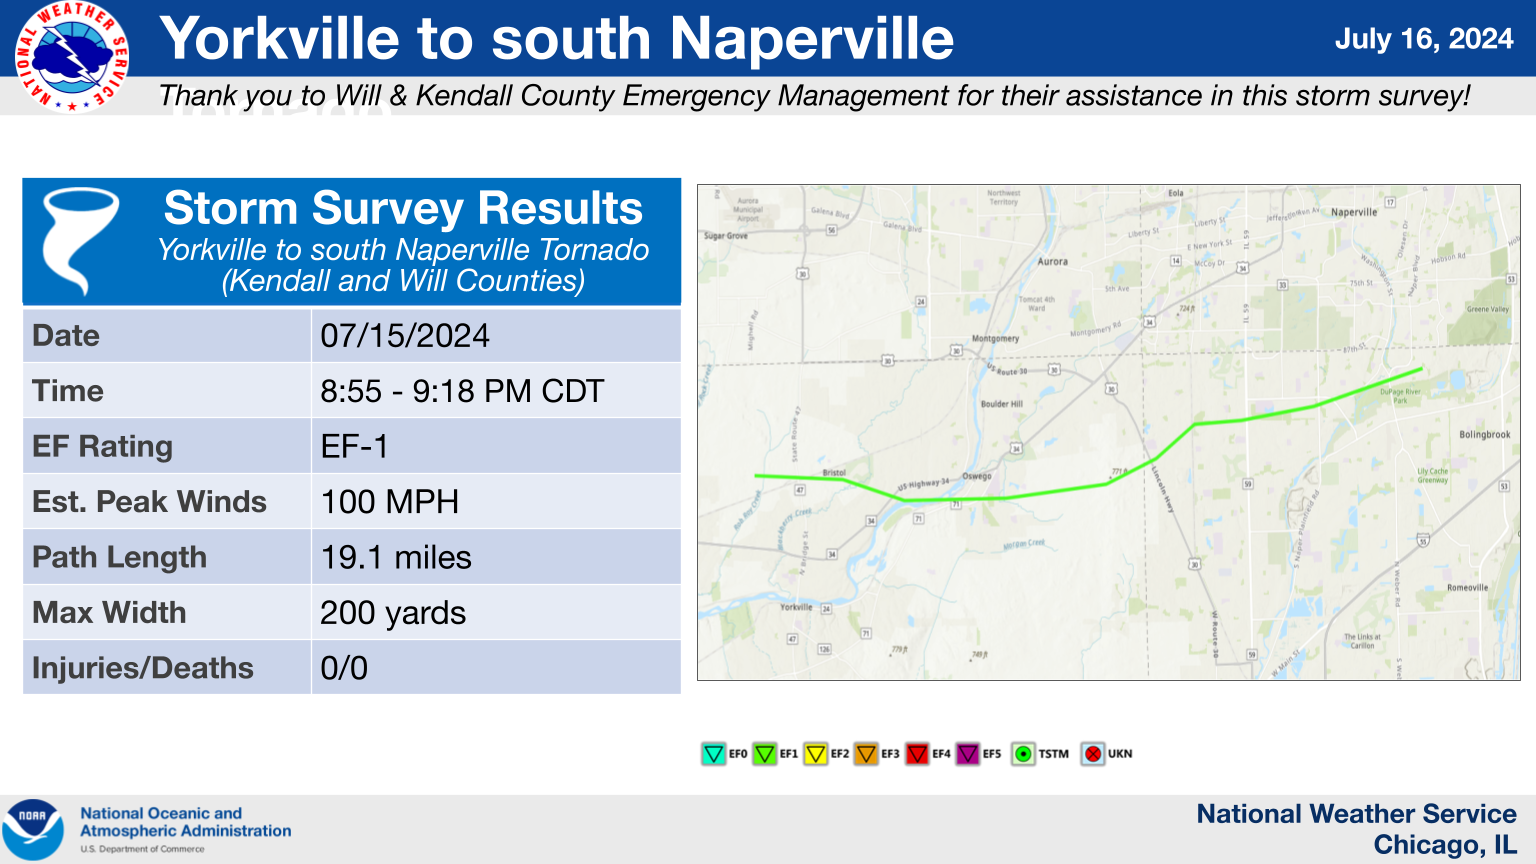 Yorkville to Naperville Tornado Summary Graphic